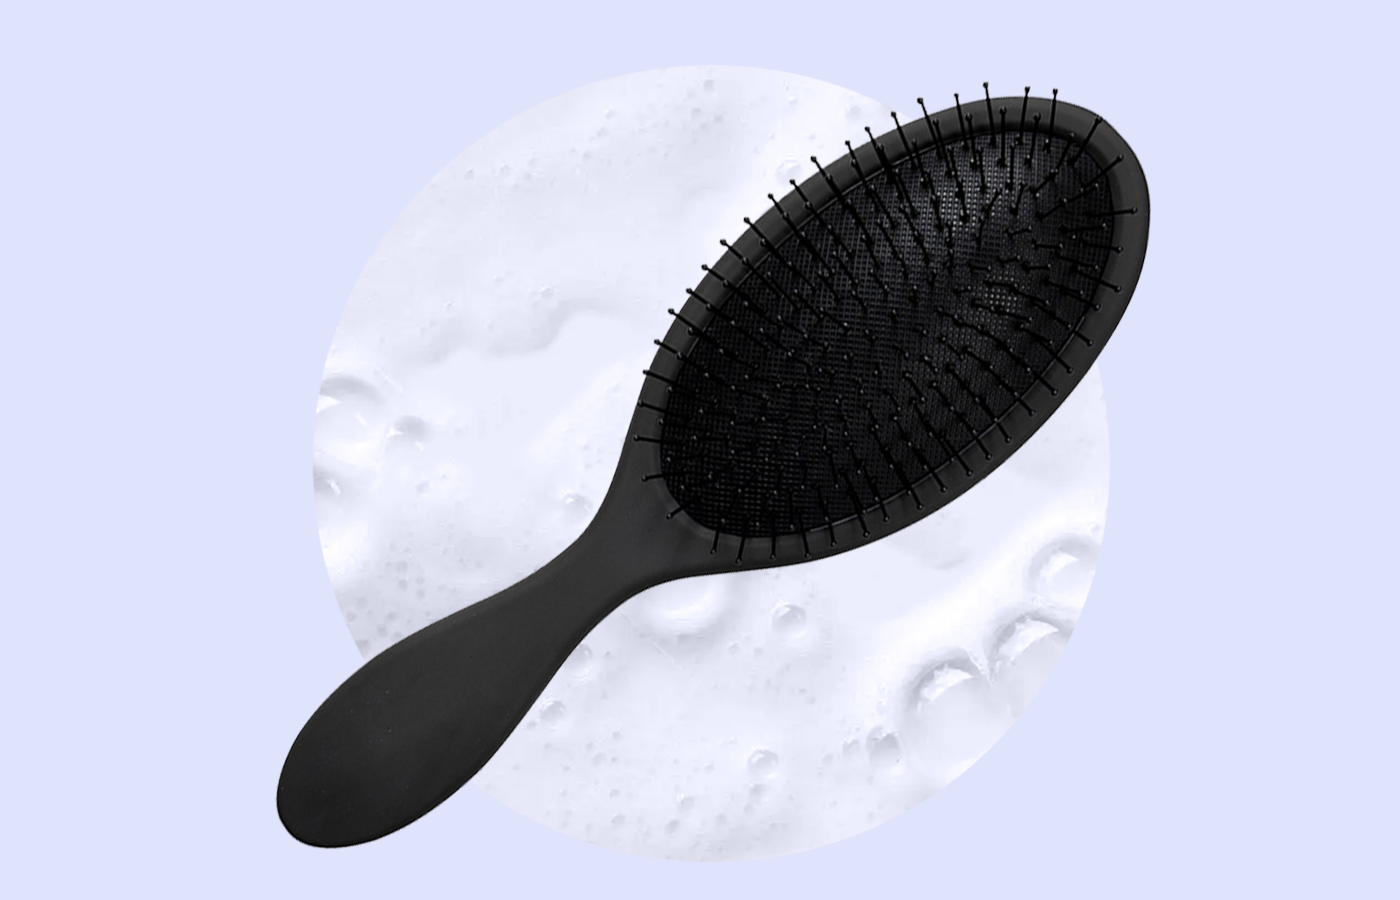 How to Clean Your Hairbrush